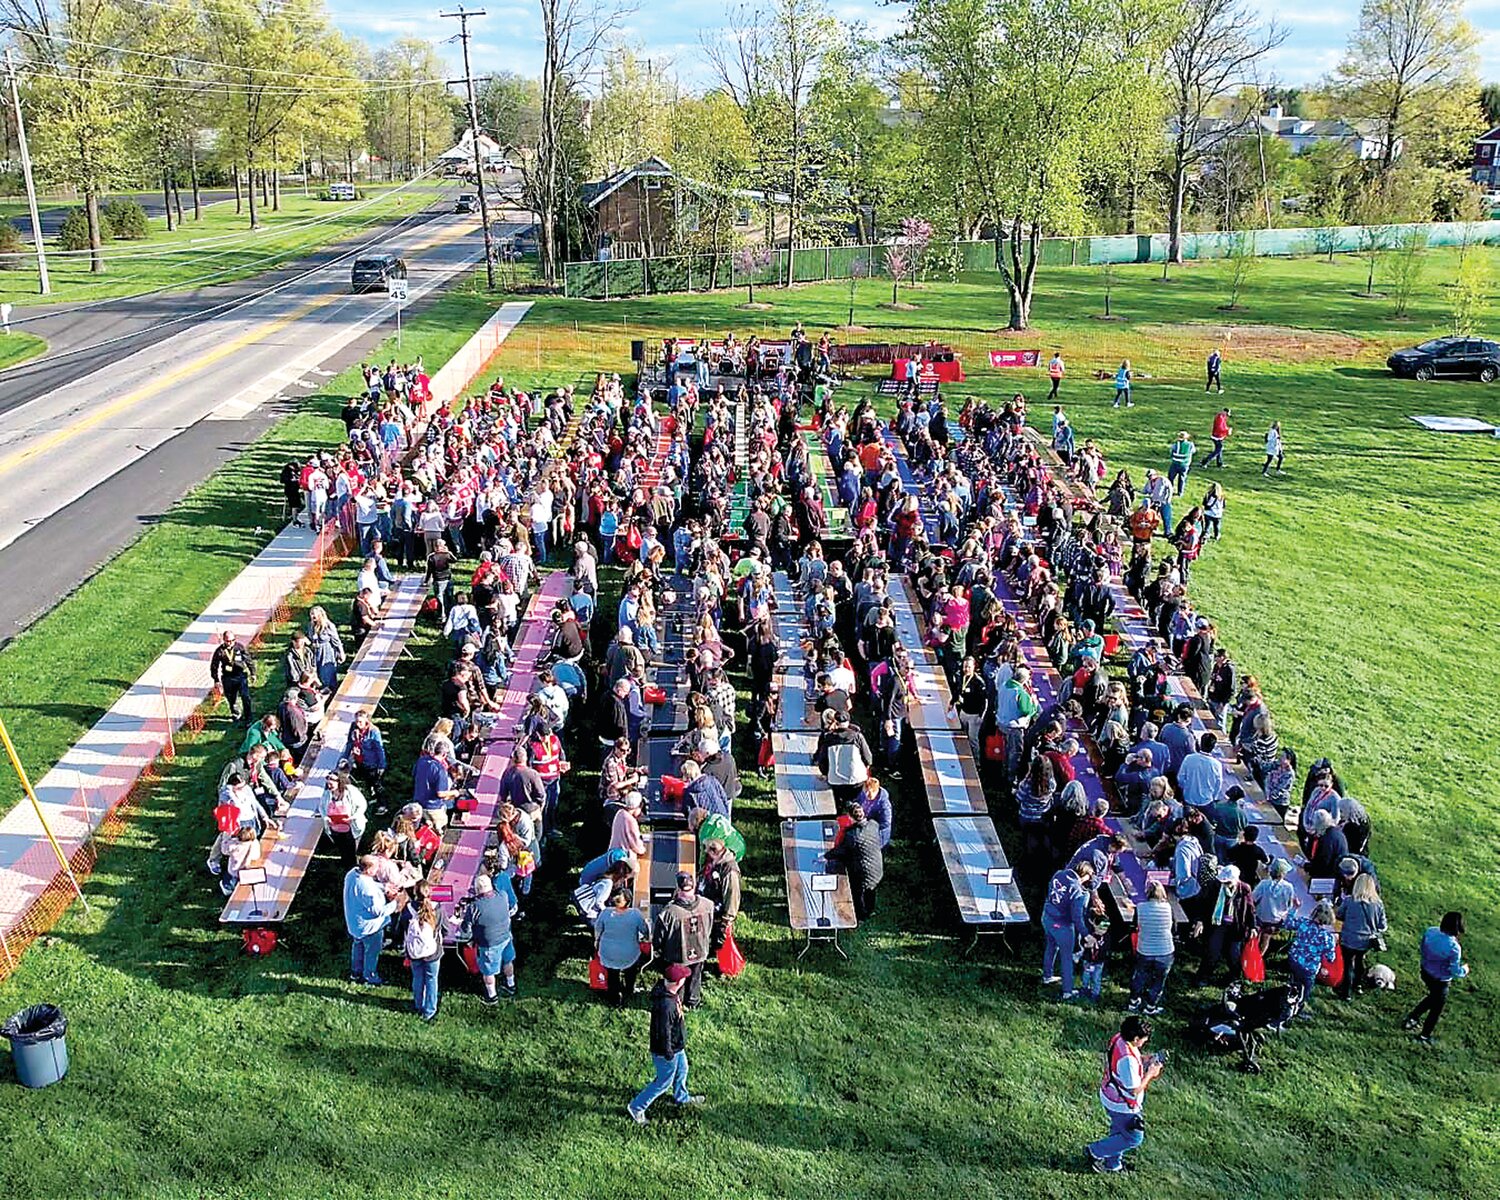 Participants gather in Plumstead Township for Tague Lumber’s recent successful attempt to break the Guinness World Records record for the most people simultaneously knocking on wood. The event saw an impressive turnout of 552 participants, surpassing the previous record of 295.